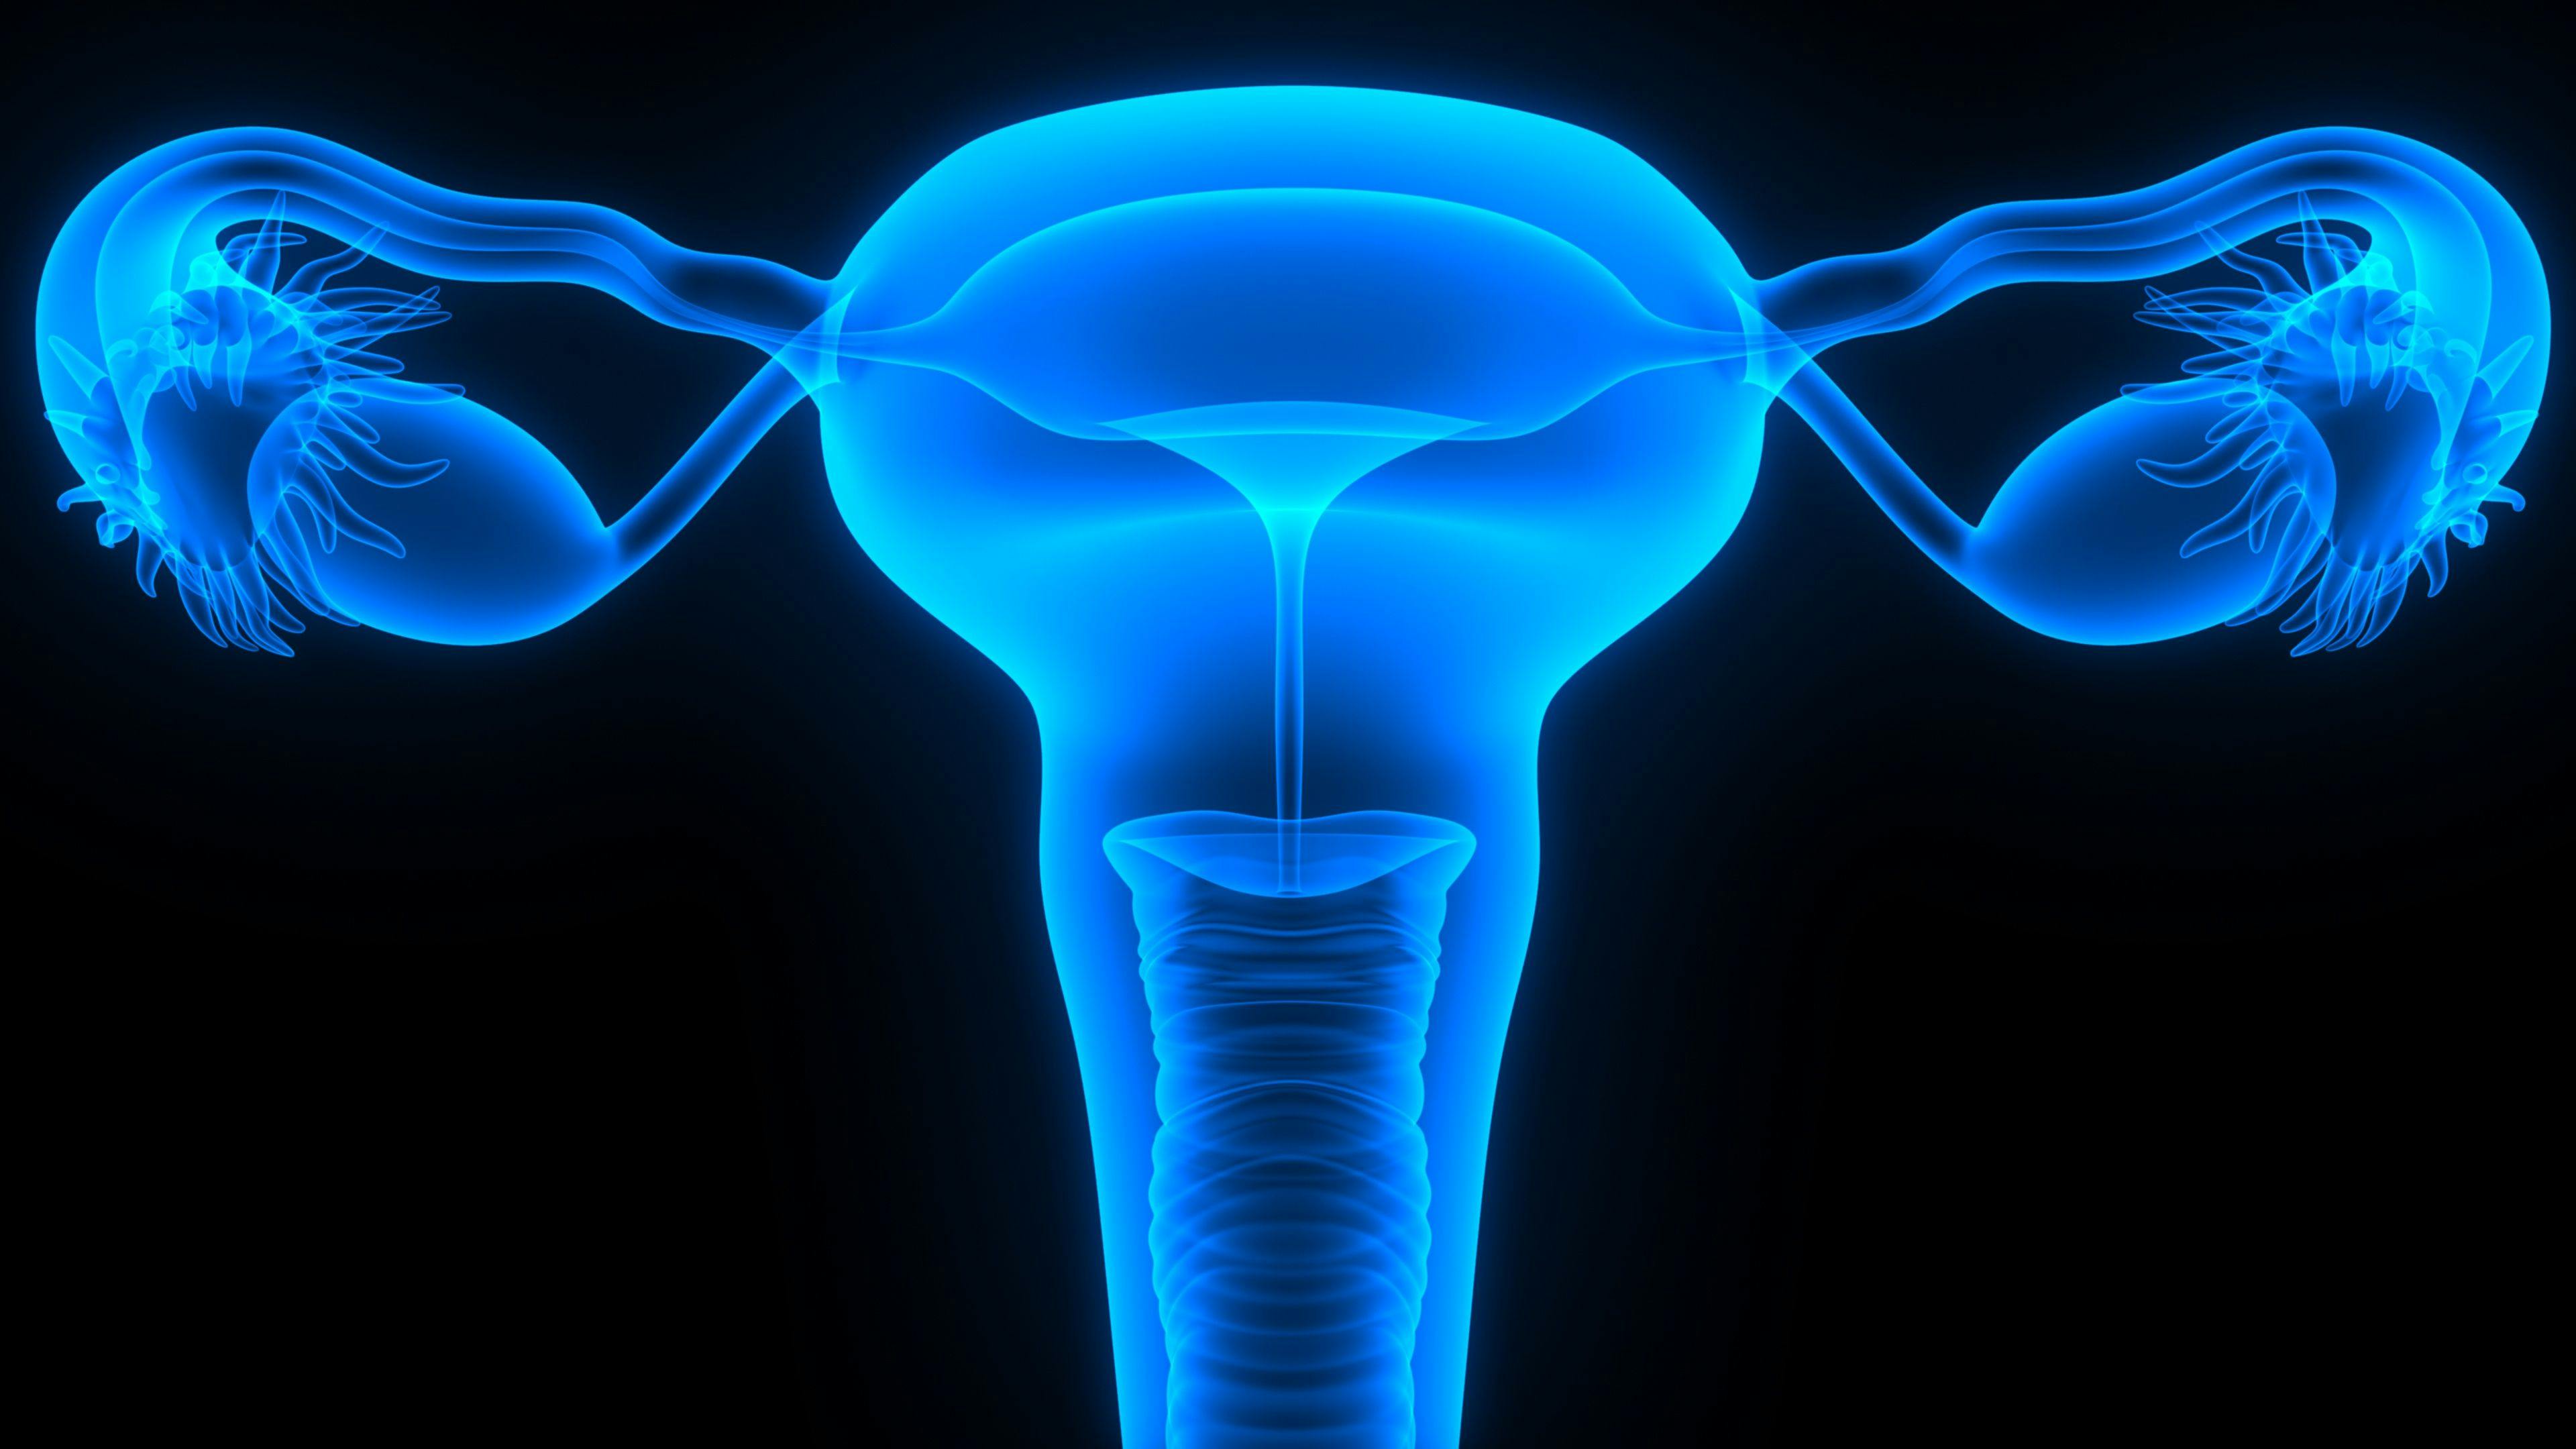 Data from the phase 3 JAVELIN Ovarian 200 trial indicated that avelumab with or without pegylated liposomal doxorubicin did not yield a significant improvement in overall or progression-free survival over the chemotherapy alone in platinum-resistant/refractory ovarian cancer.